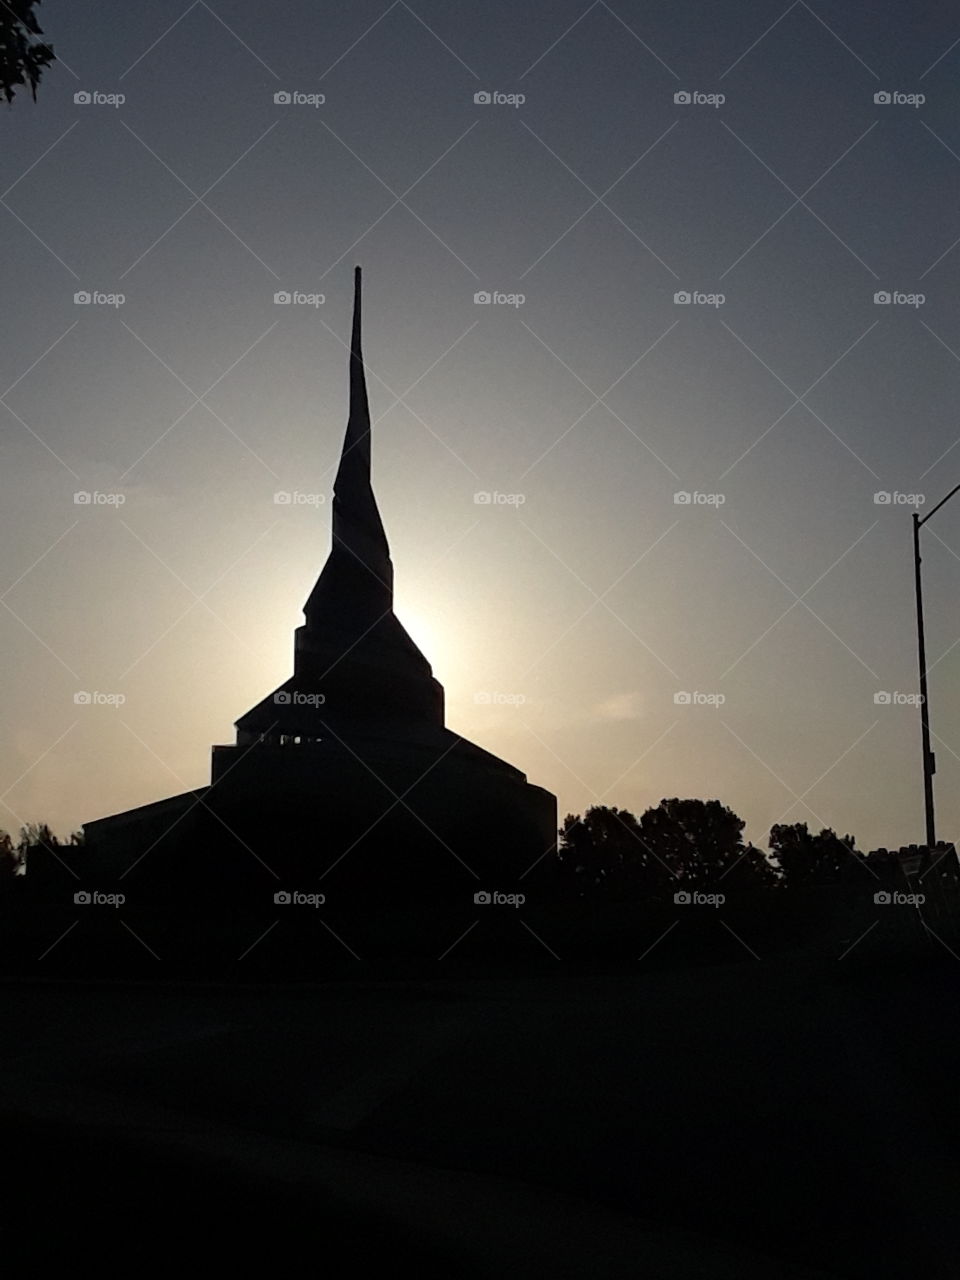 Community of Christ Temple Independence Missouri Morning Silhouette